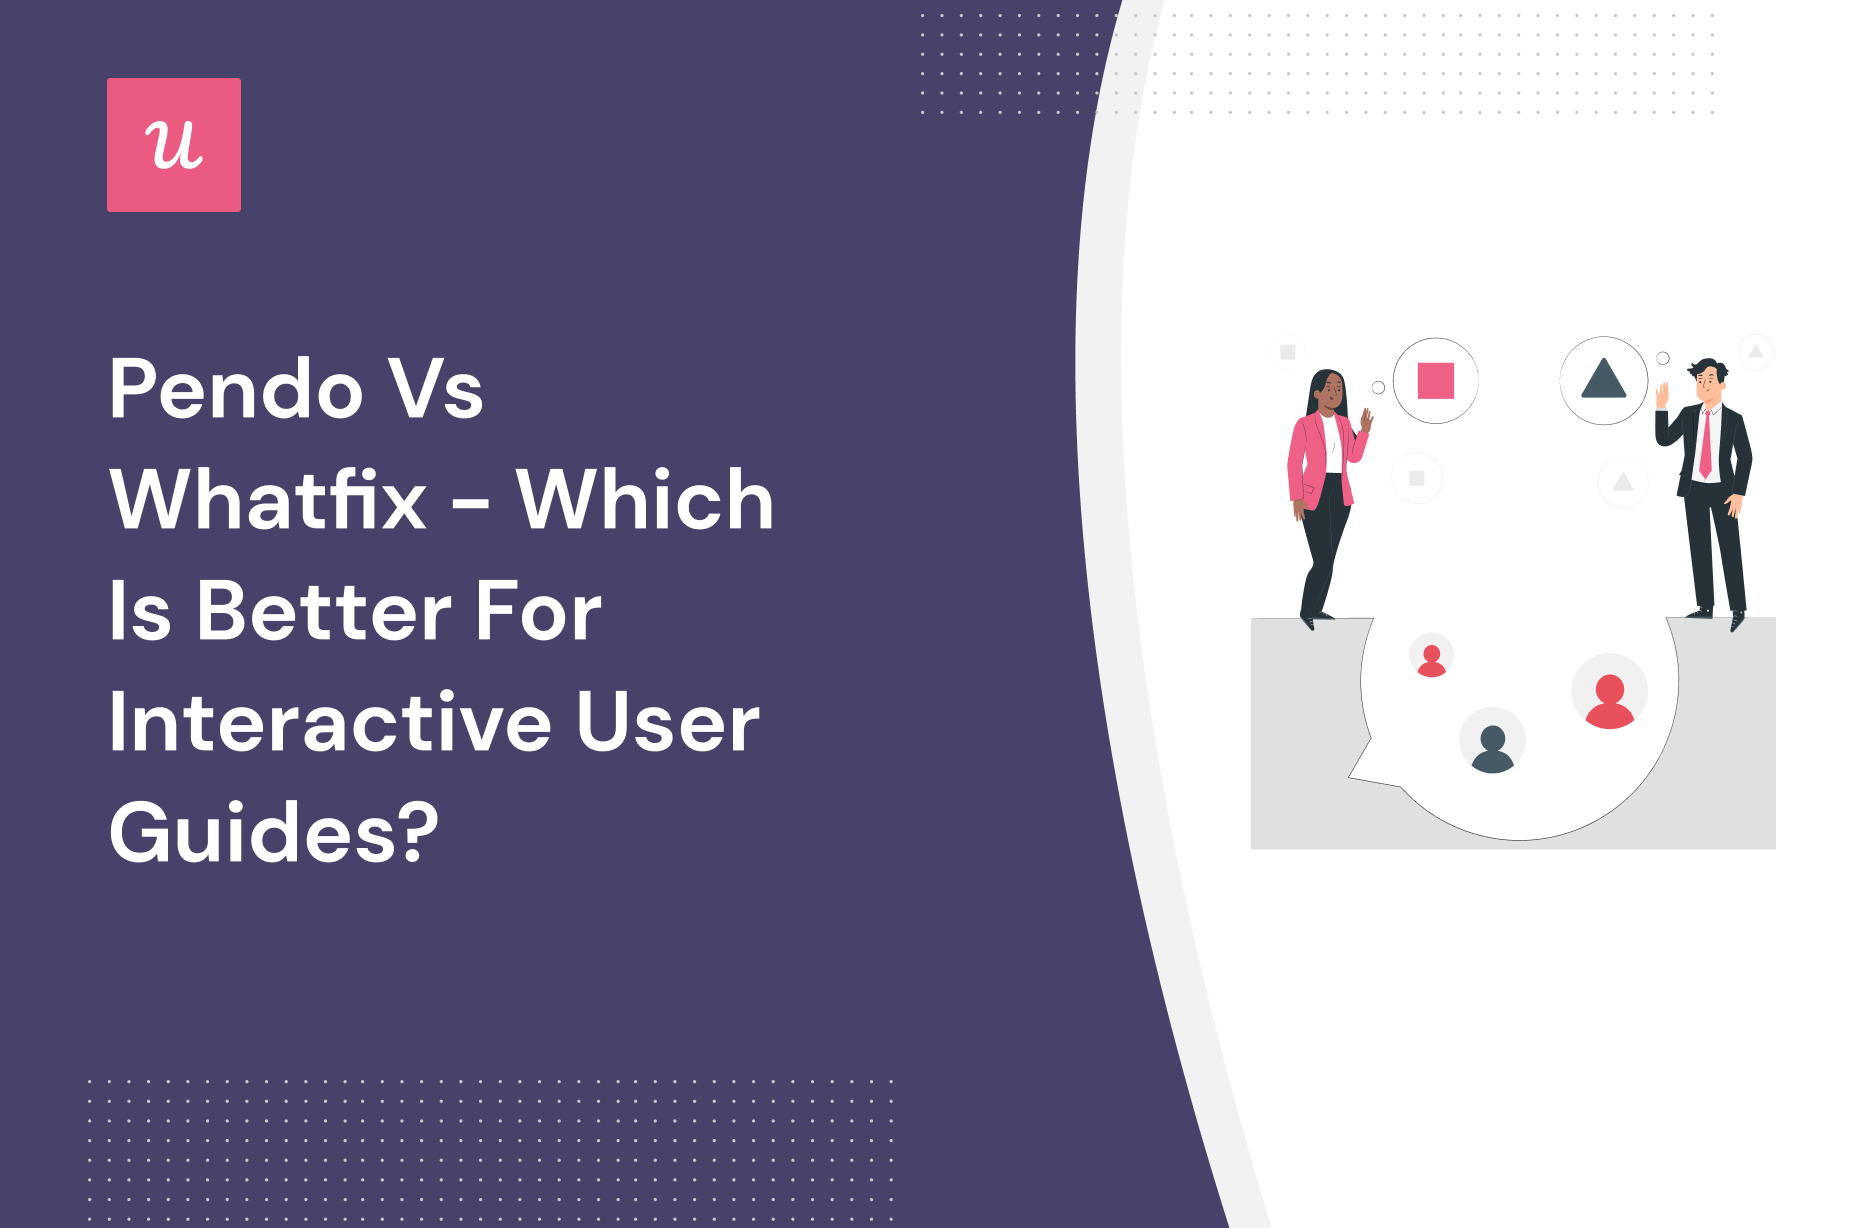 Pendo vs Whatfix - which is better for interactive user guides